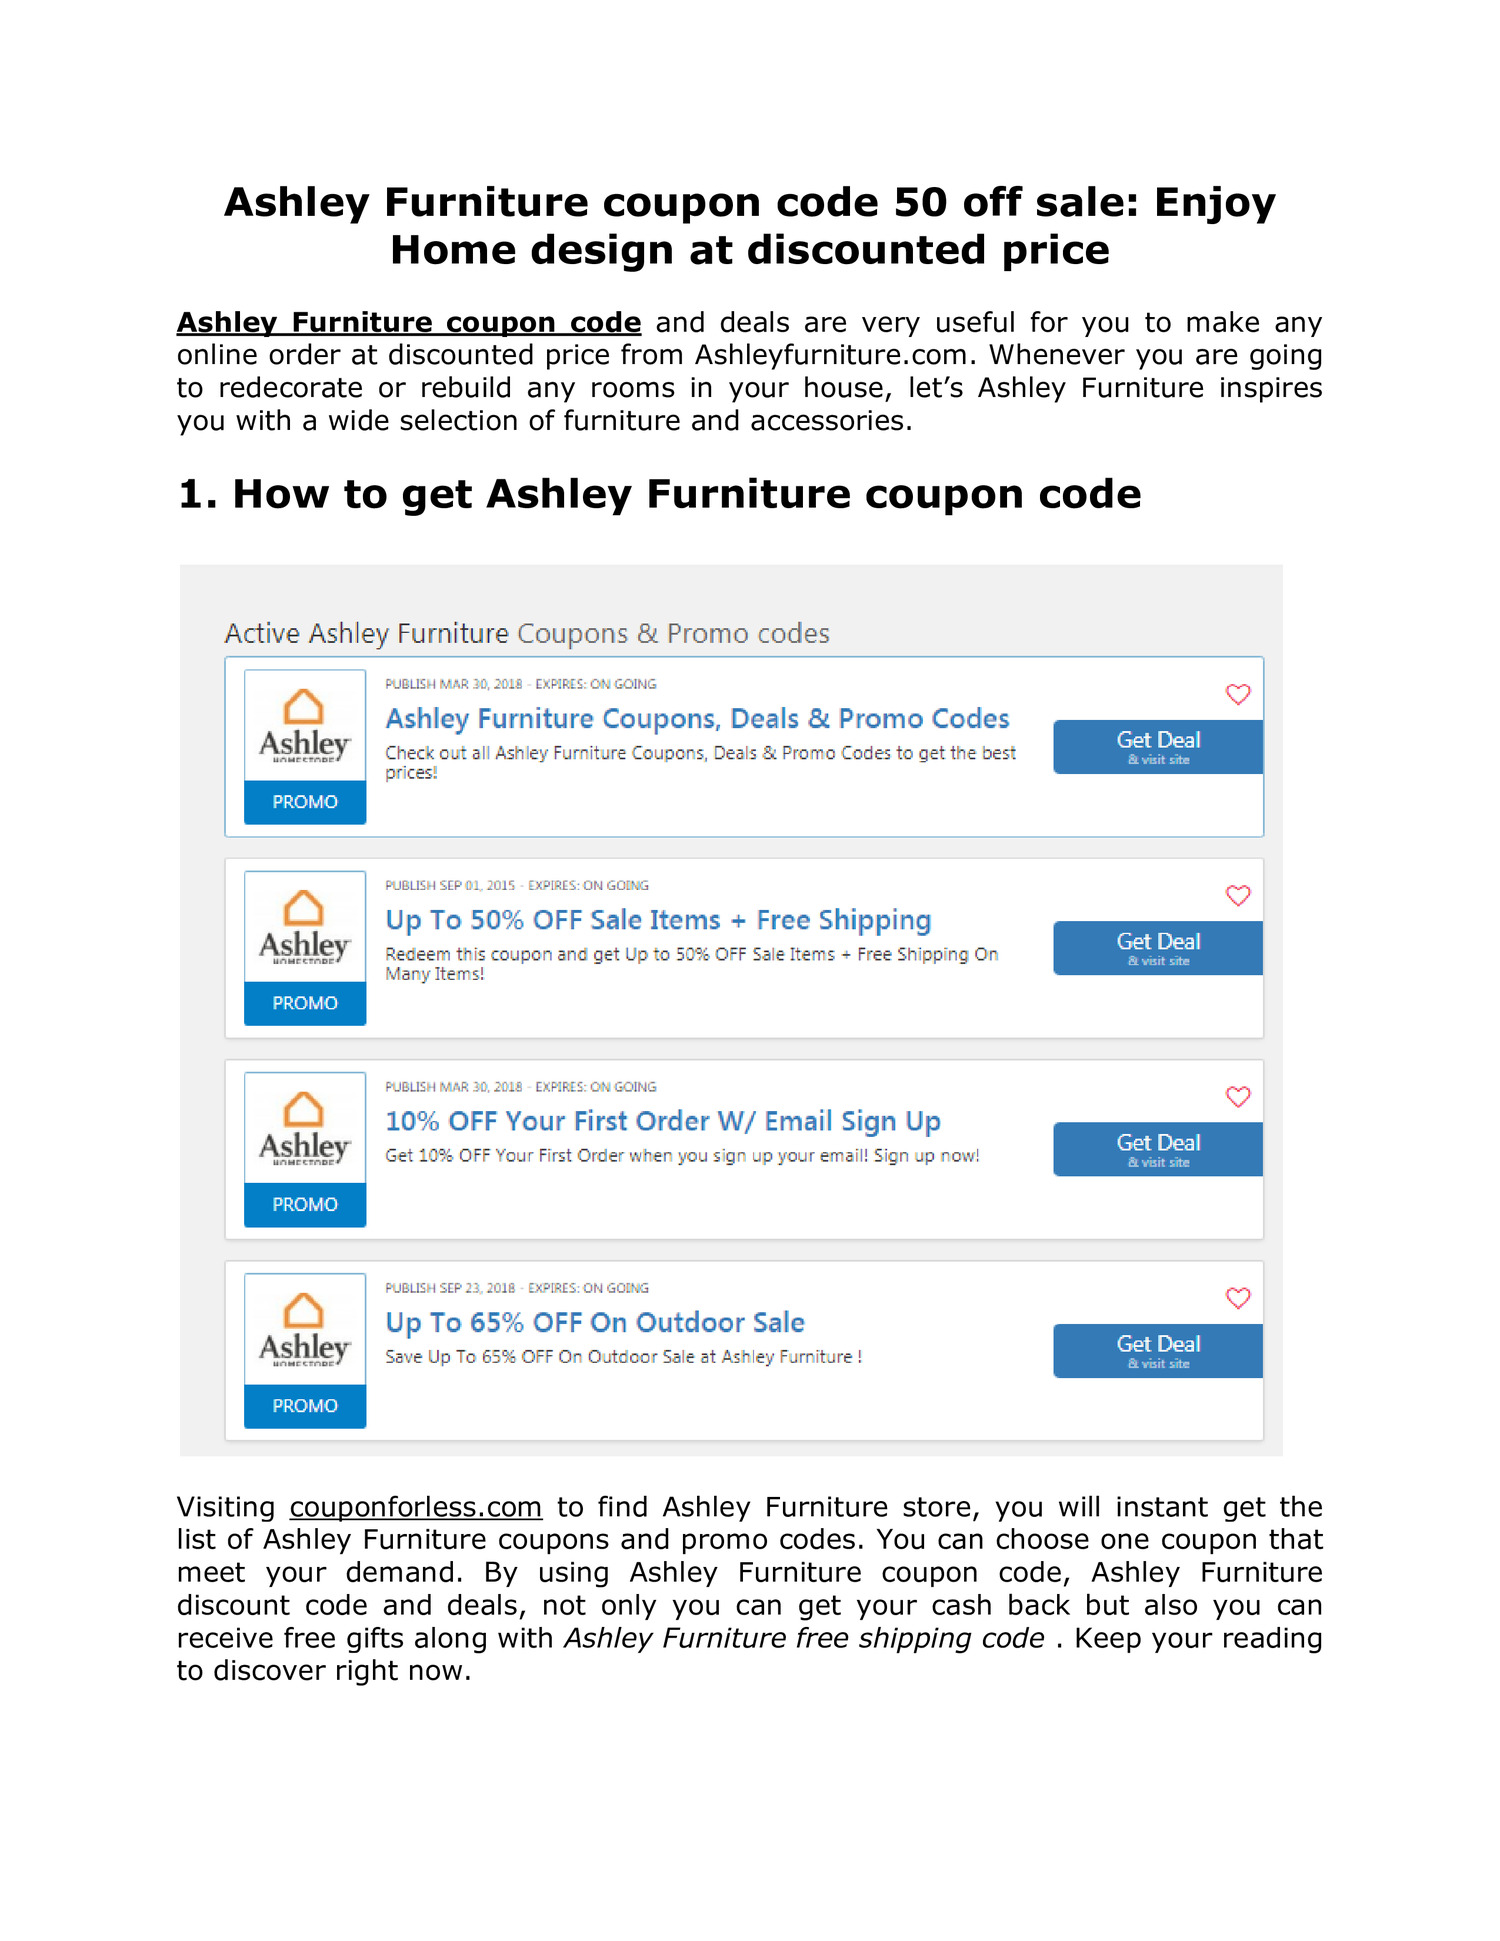 Ashley Furniture Coupon Code 50 Off Sale Docx Docdroid